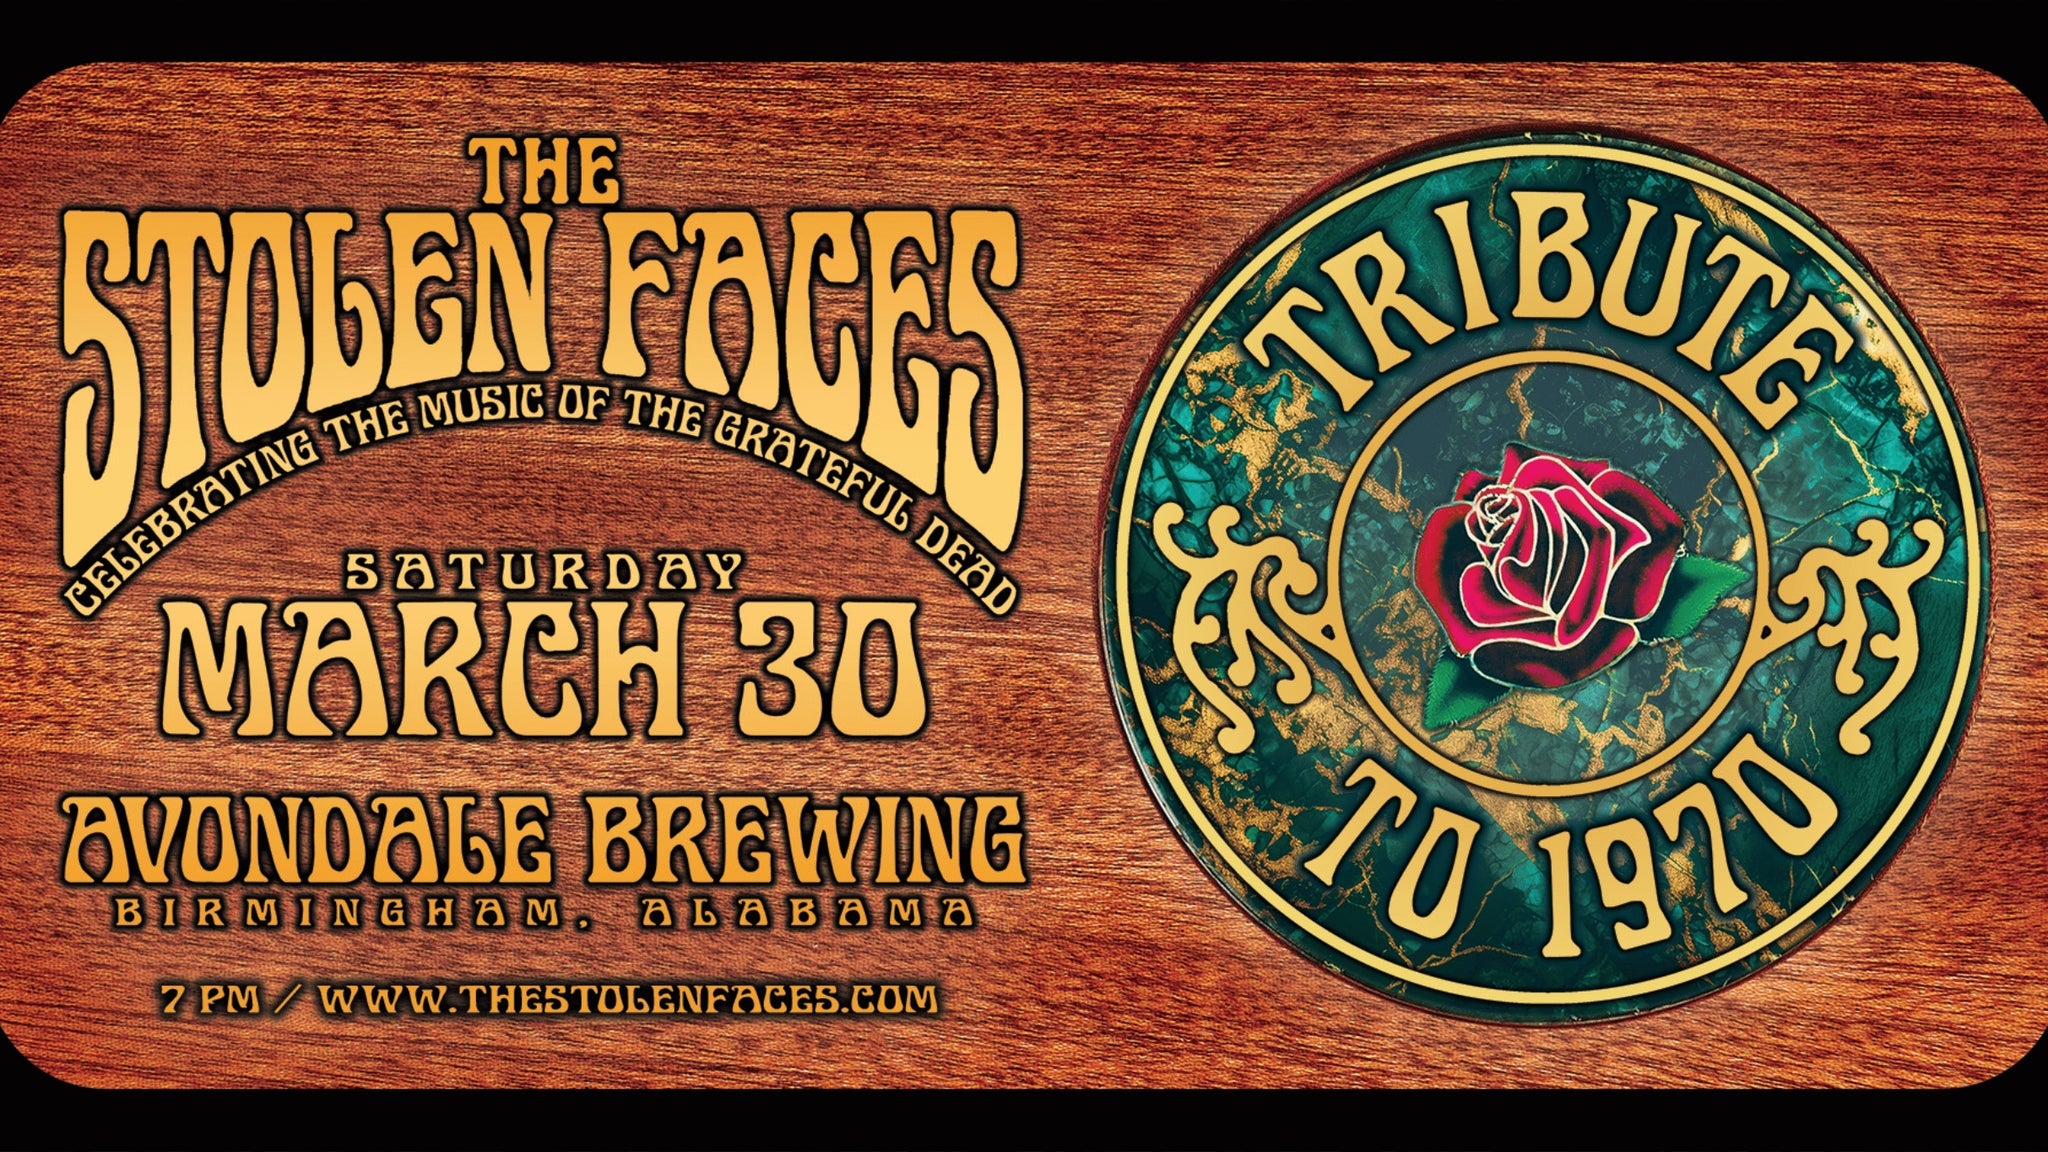 The Stolen Faces: A Tribute to 1970 at Avondale Brewing Co.